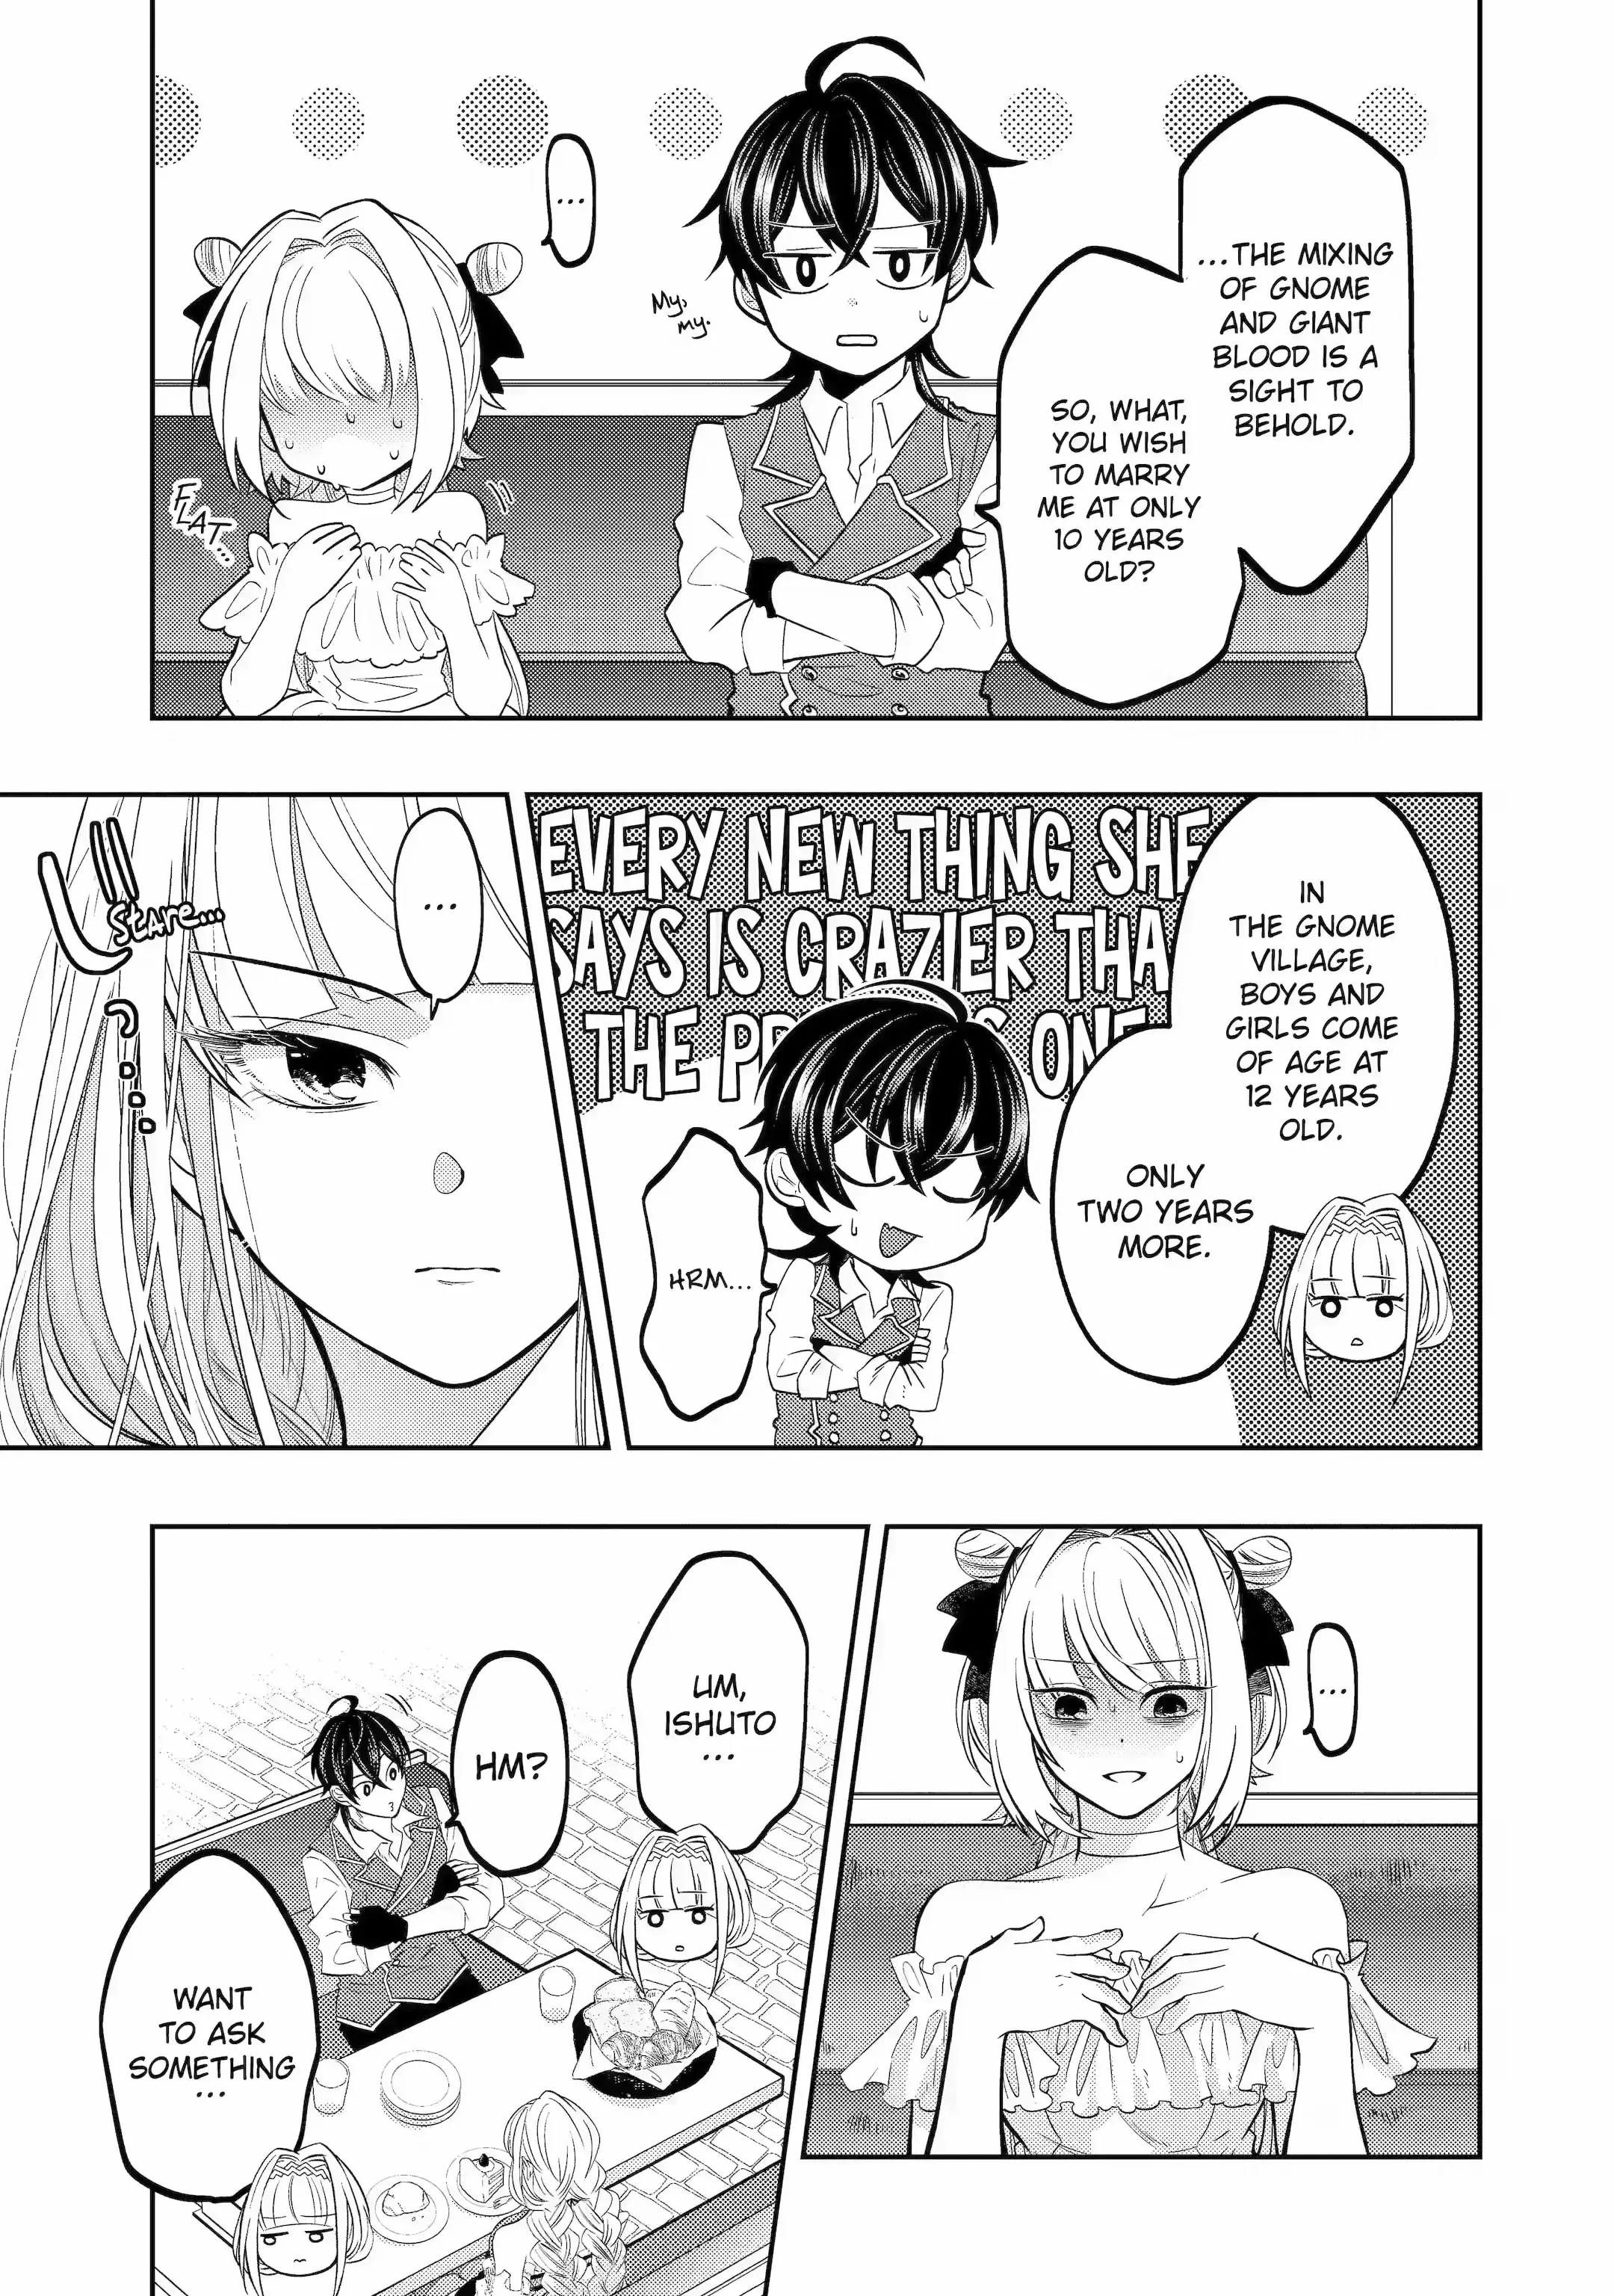 Level 0 Evil King Become the Adventurer In the New World chapter 17.5 - page 2